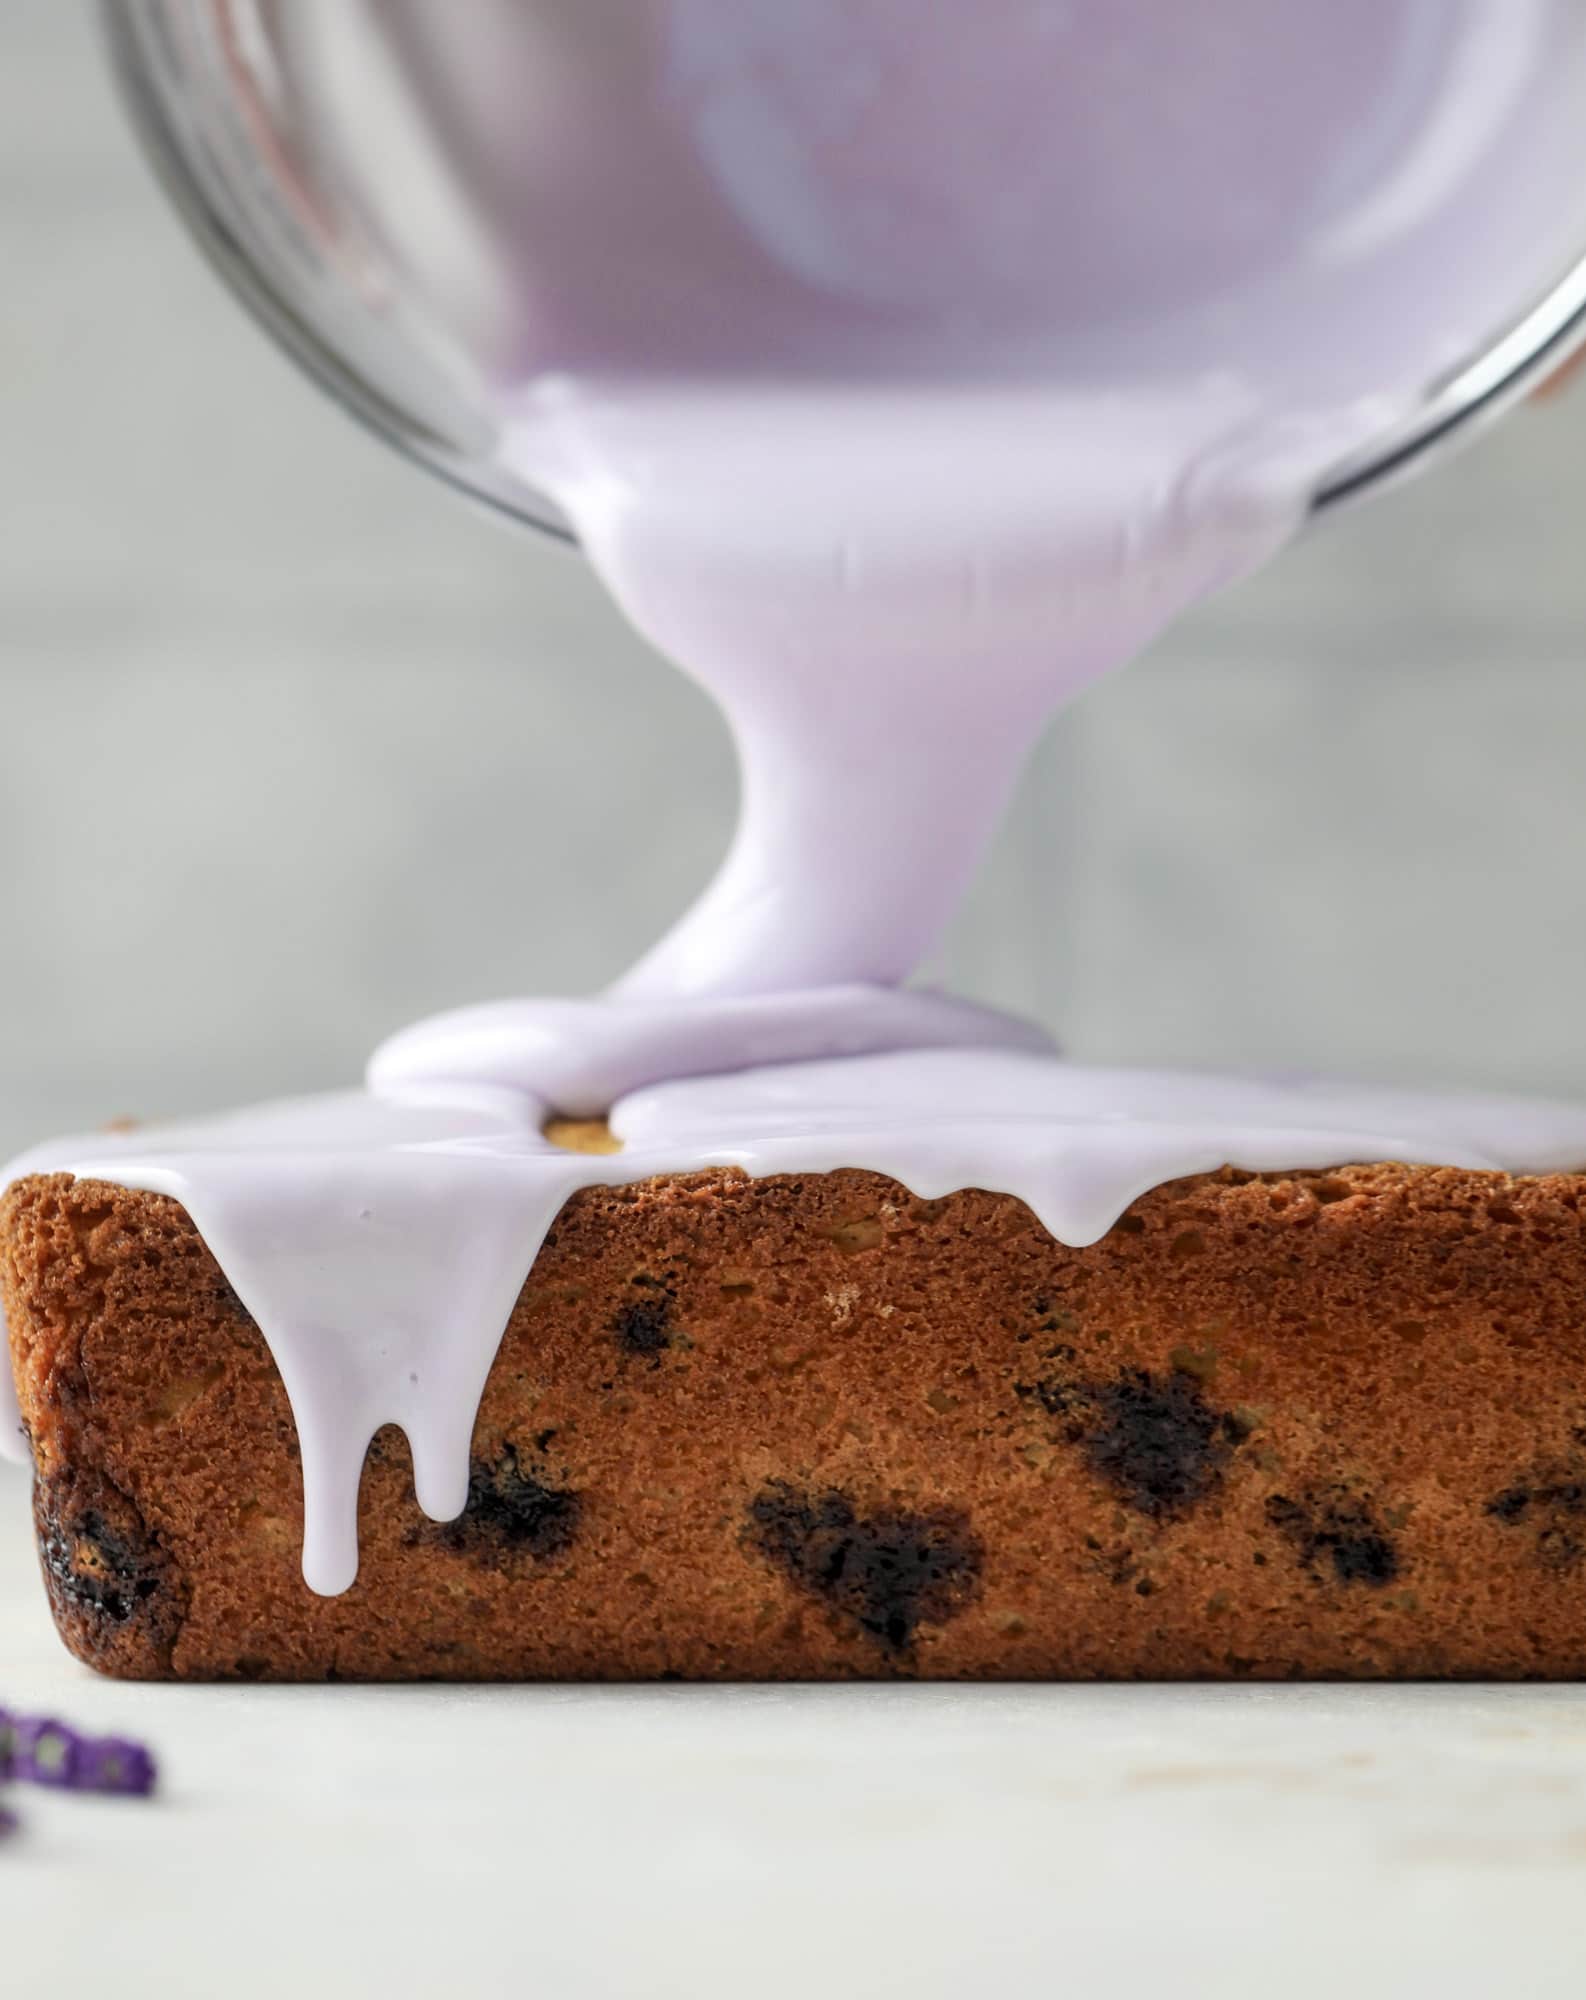 This lovely blueberry ricotta cake is covered in a lavender glaze and the perfect recipe for blueberry season! It's rich and light and super flavorful.